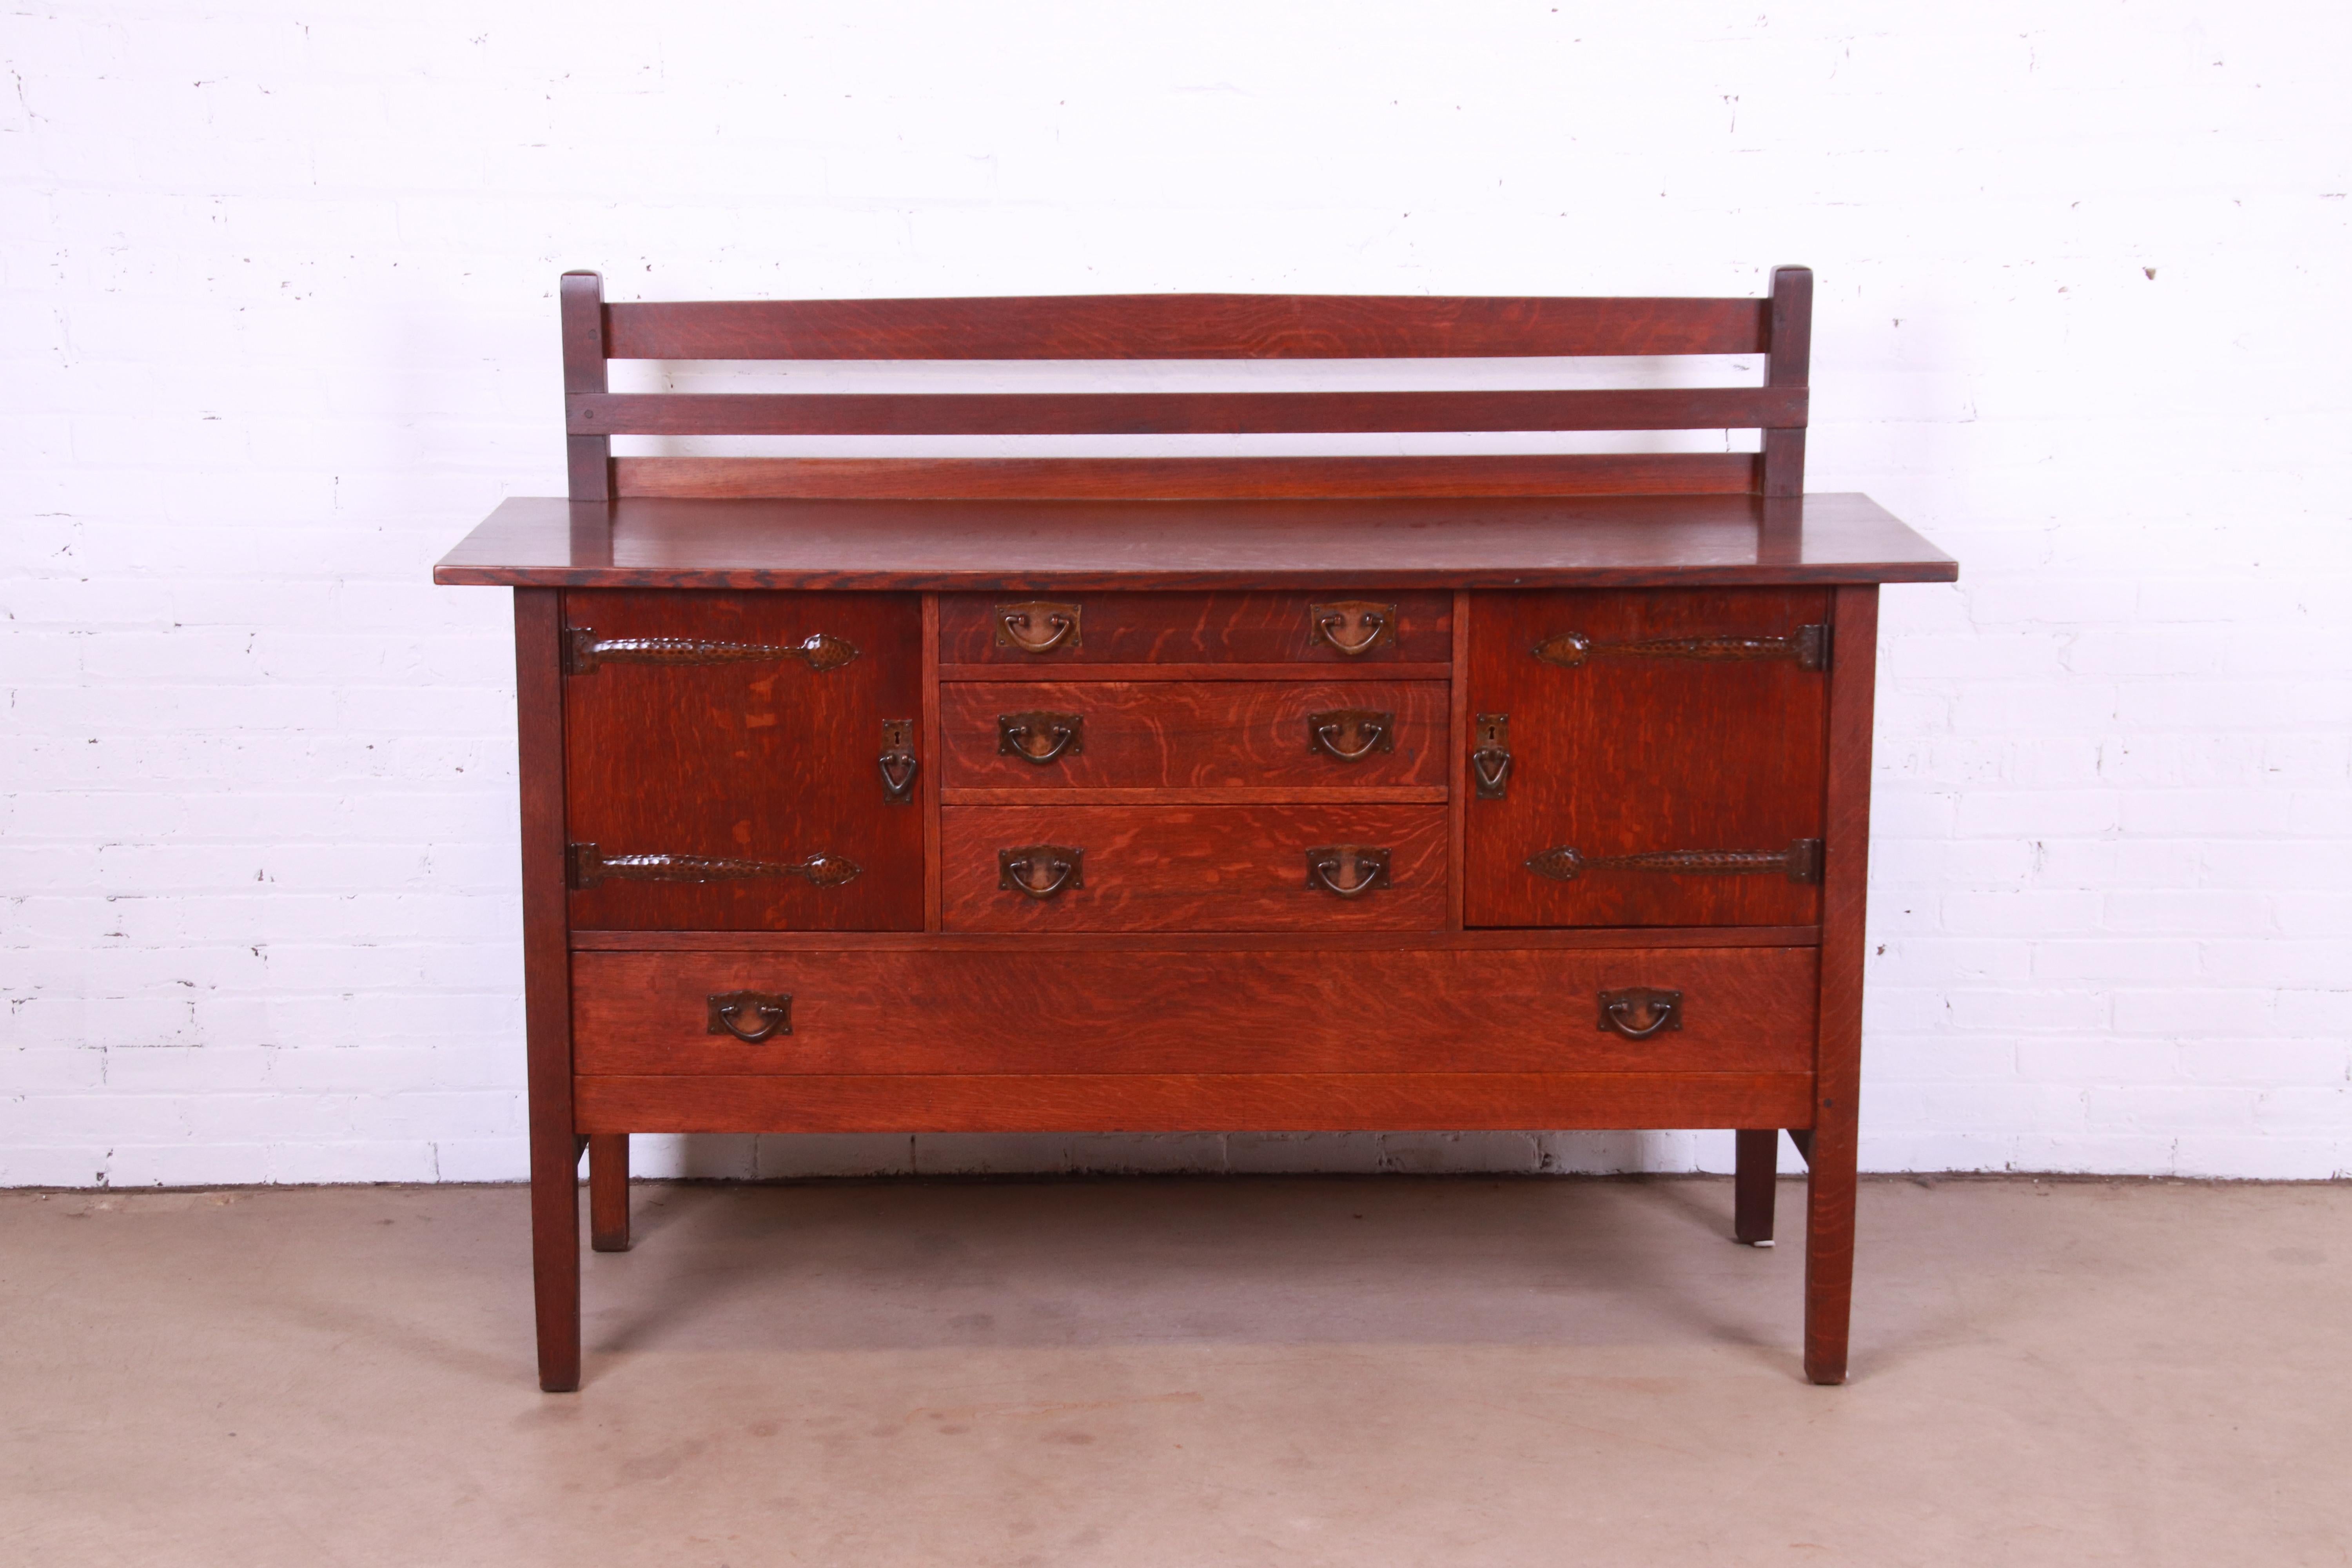 A rare and exceptional antique Mission oak Arts & Crafts sideboard or credenza with plate rack

By Gustav Stickley

USA, Circa 1900

Quarter sawn oak, with ooze leather lined top drawer, and original hammered copper hardware.

Measures: 66